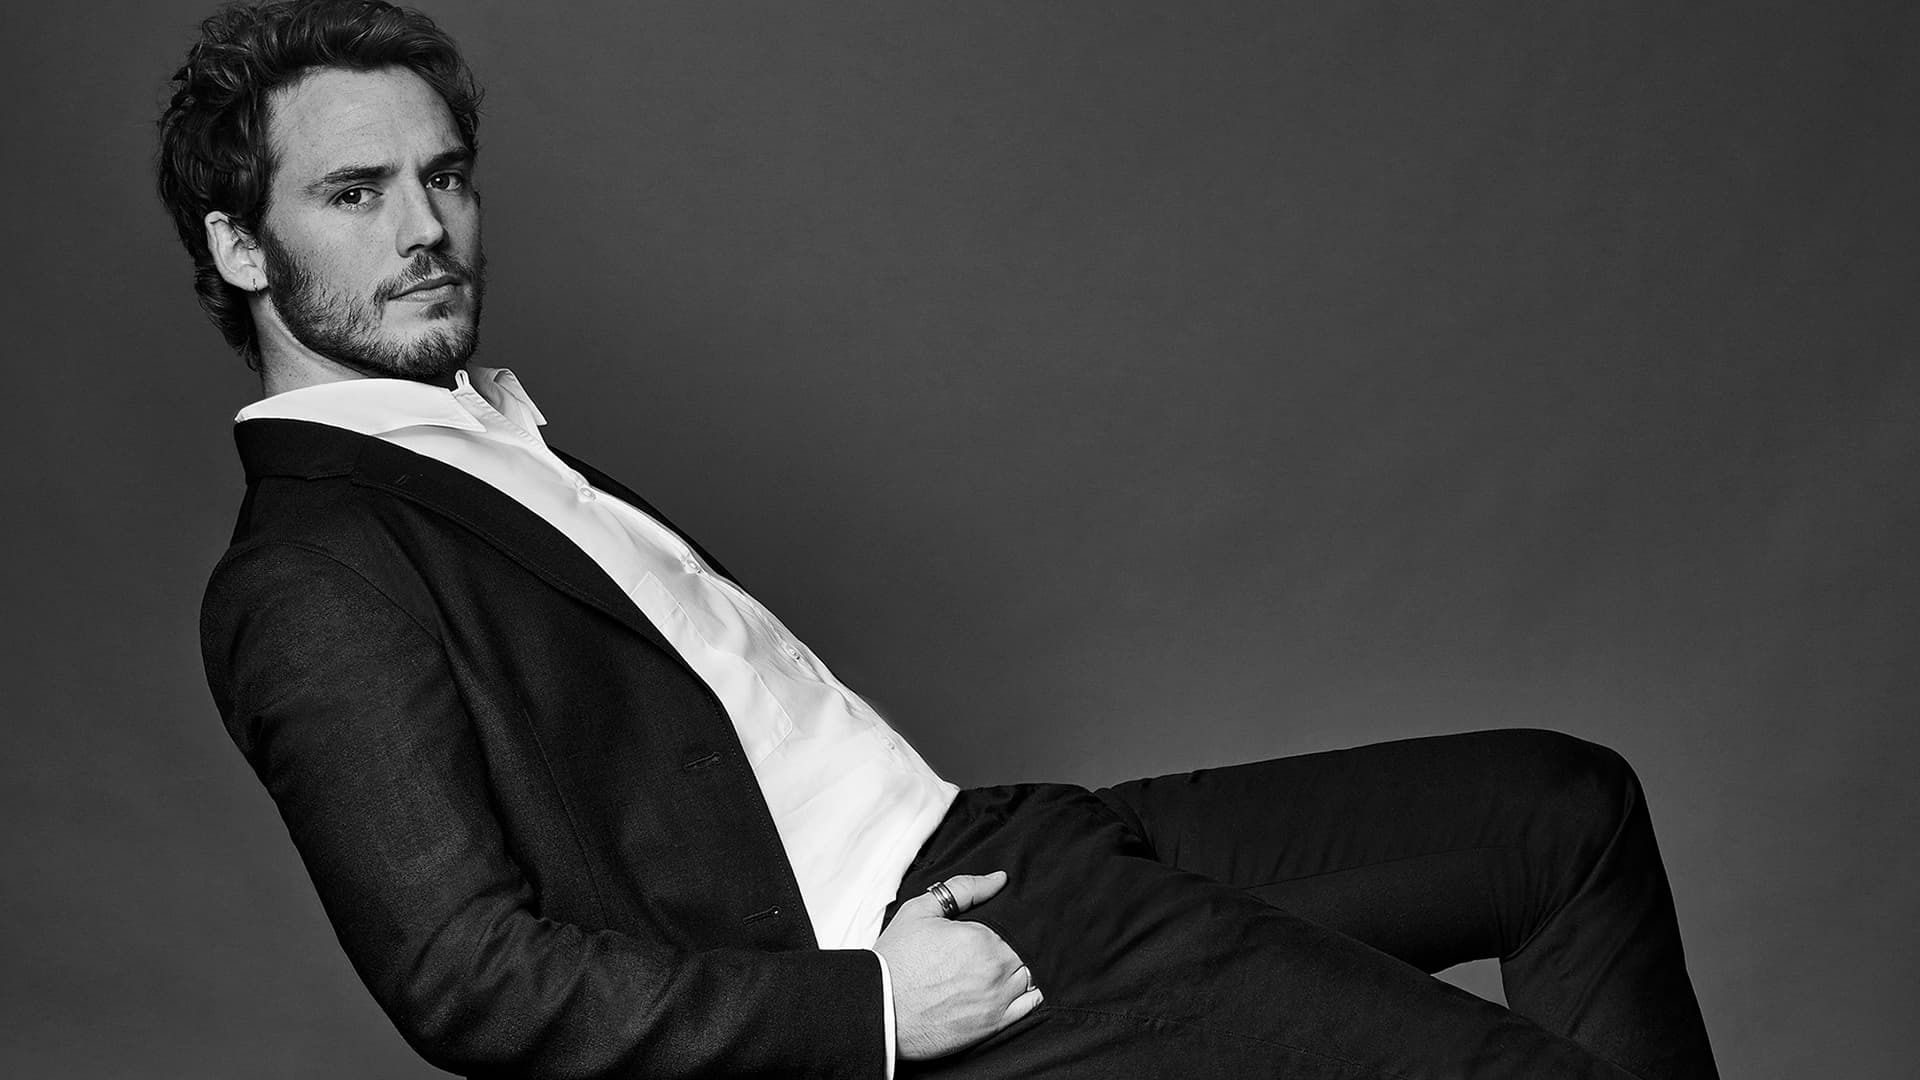 Sam Claflin Wallpapers Images Photos Pictures Backgrounds1920 x 1080